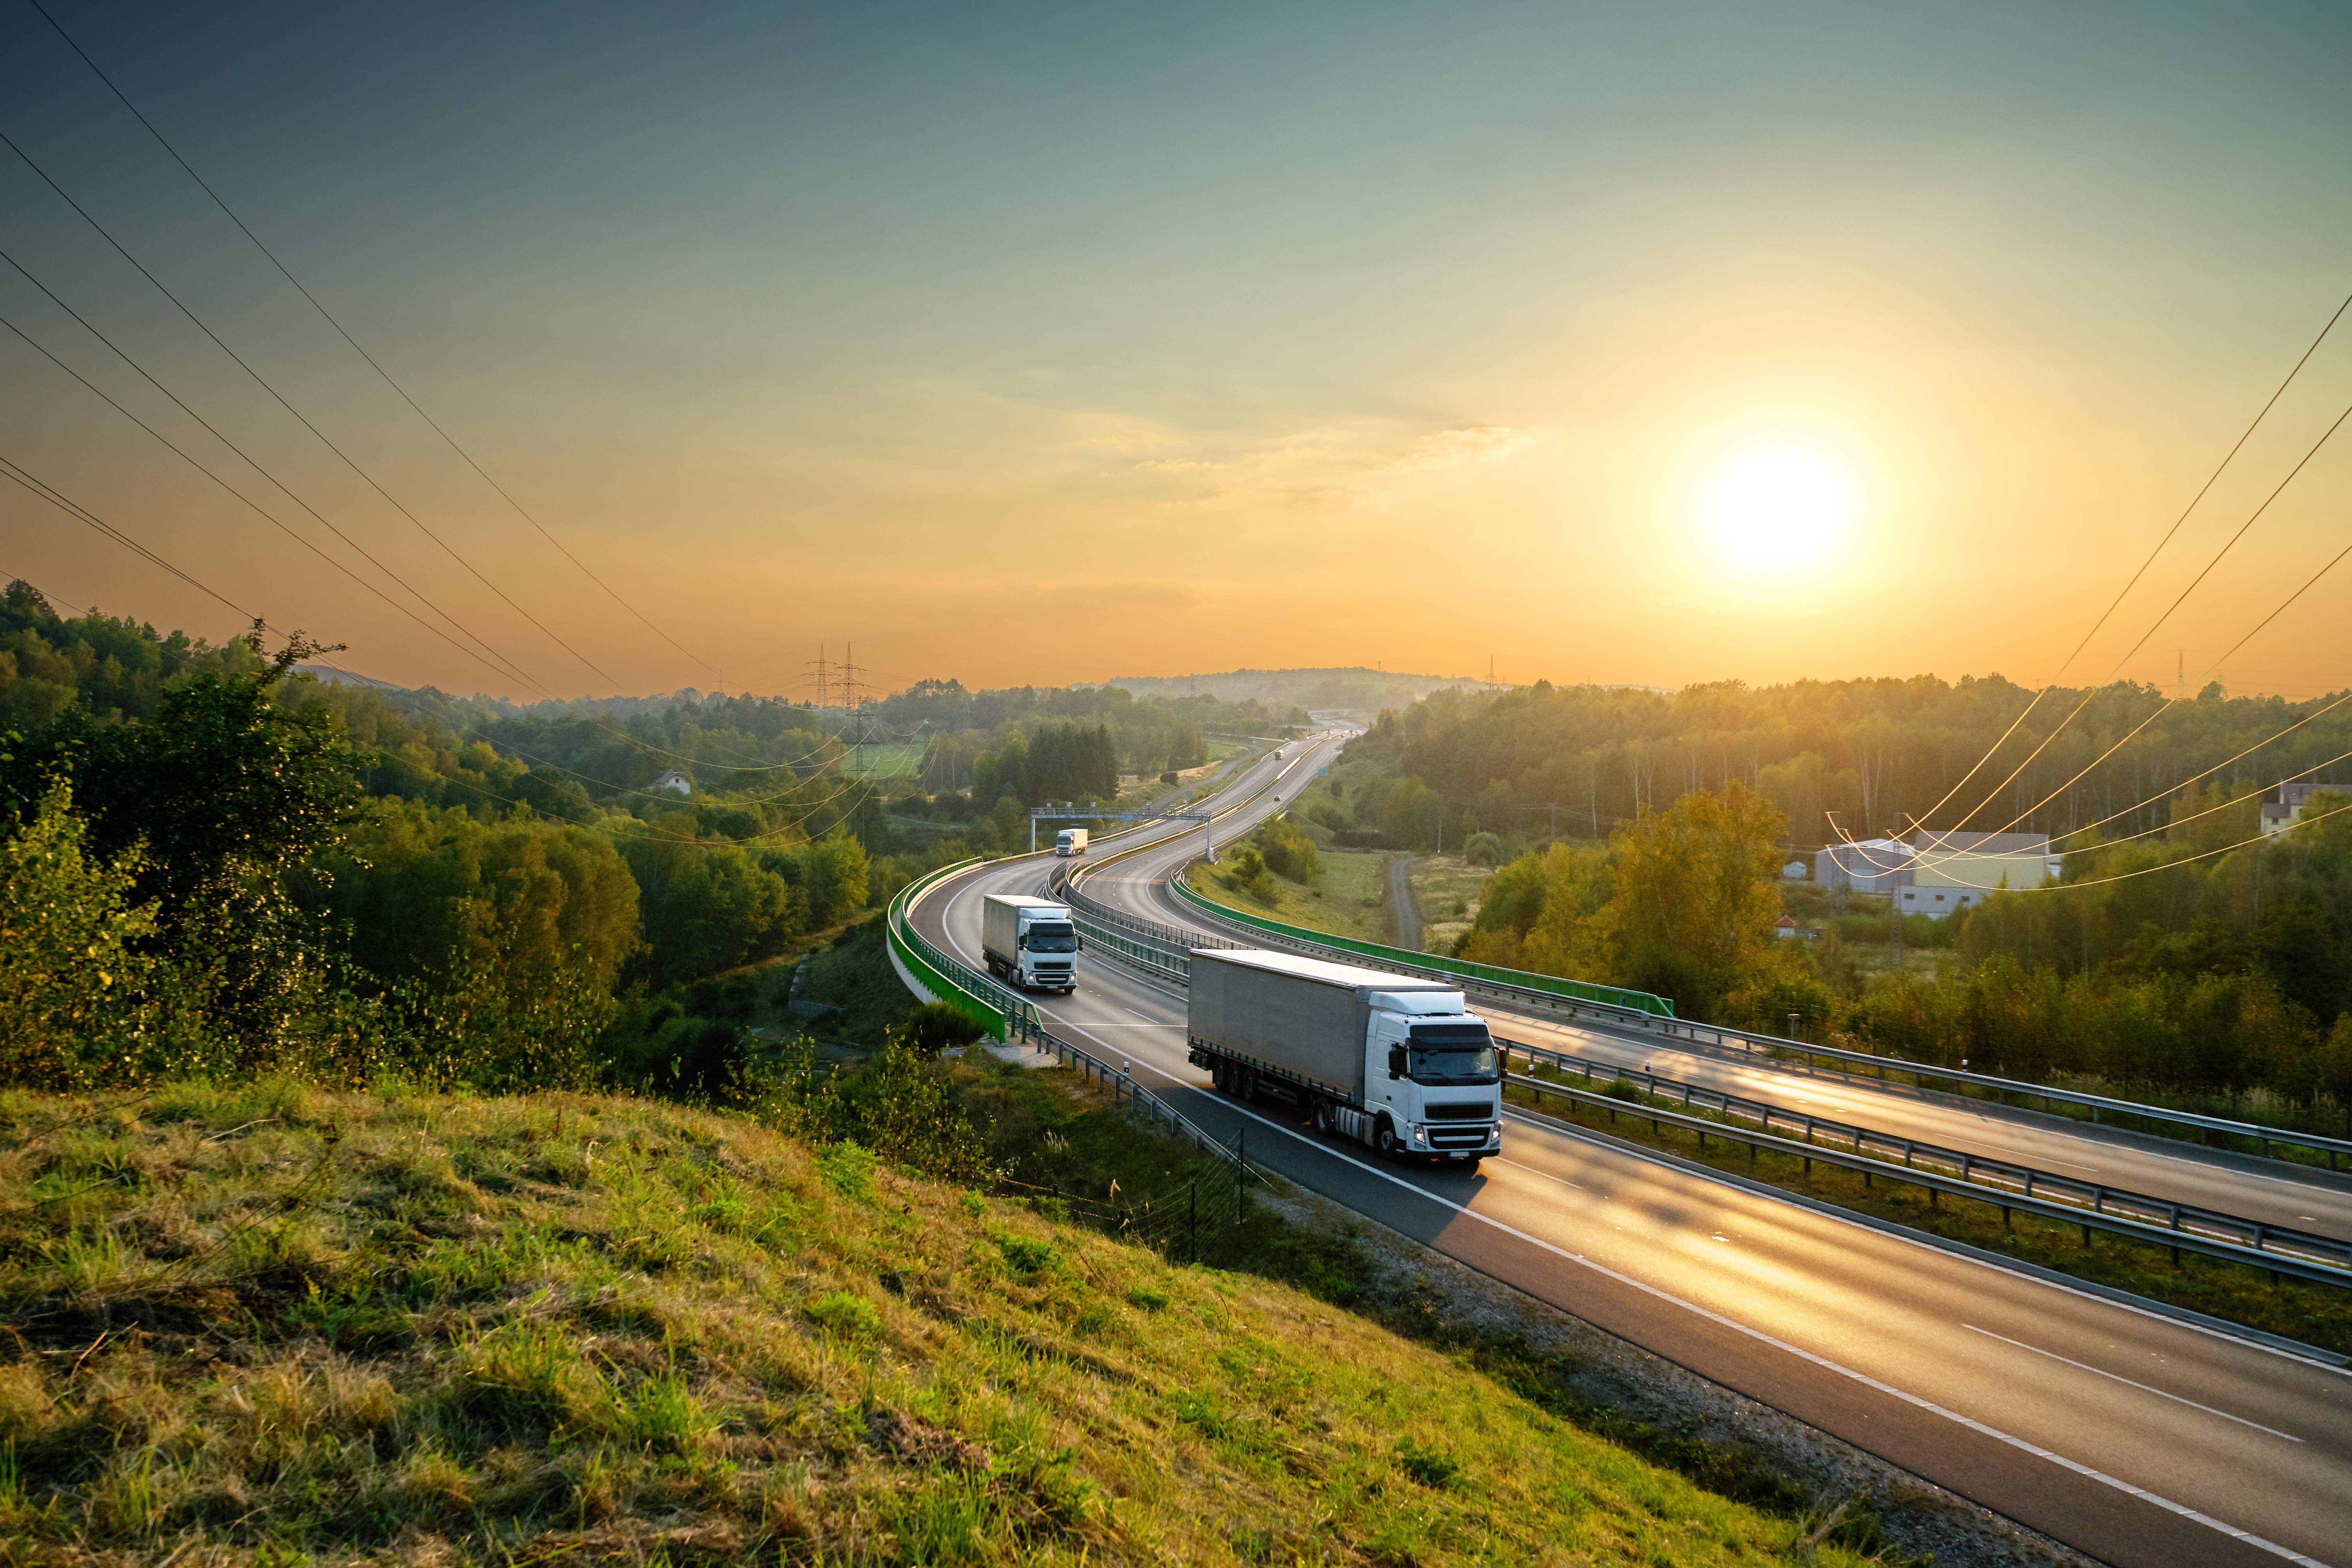 Inaction costs: Transport companies' sustainability commitments